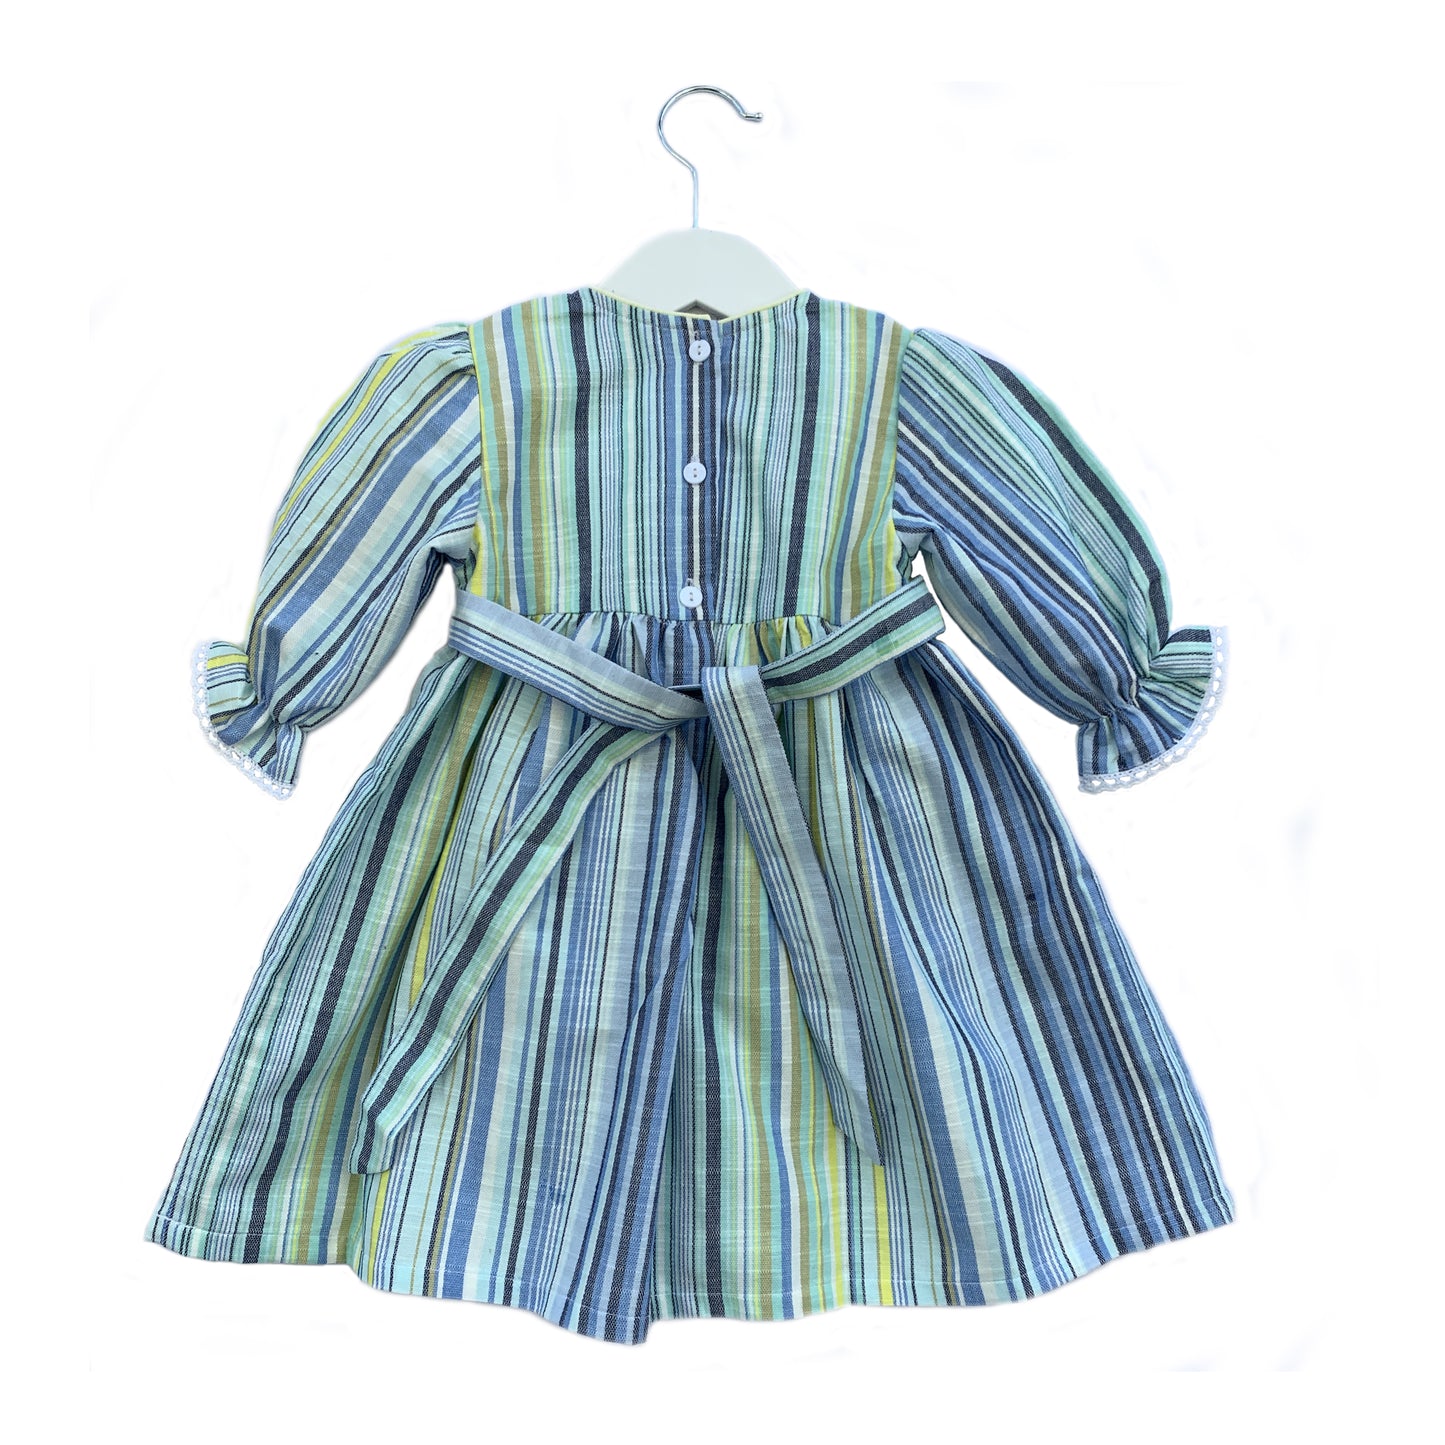 Tasteful long sleeves yellow and blue striped smocked dress.